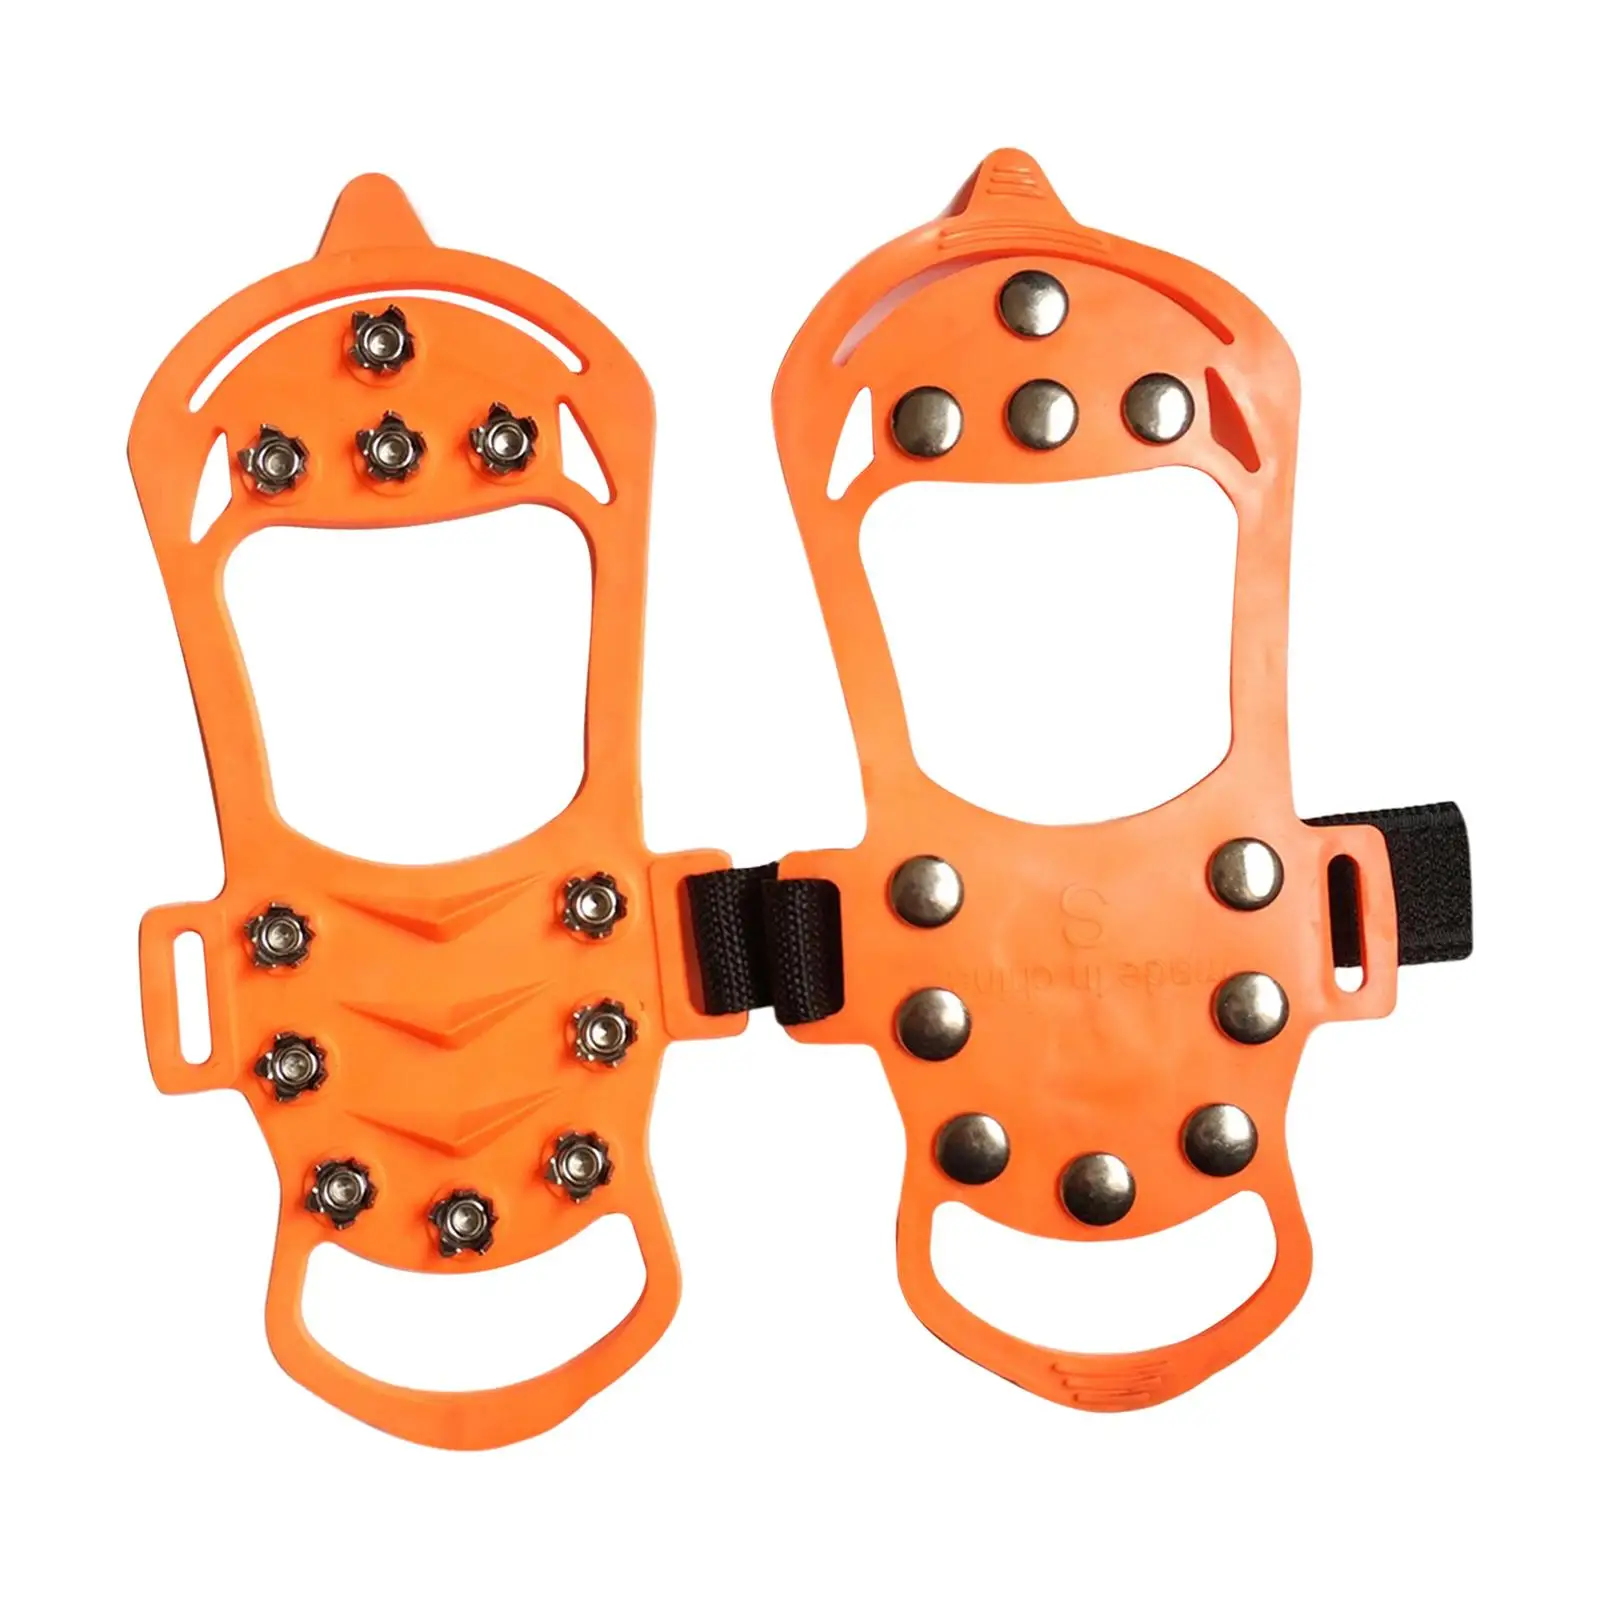 11 Spikes Crampons, Lightweight Ice Grippers Traction Cleats for Snow Boots